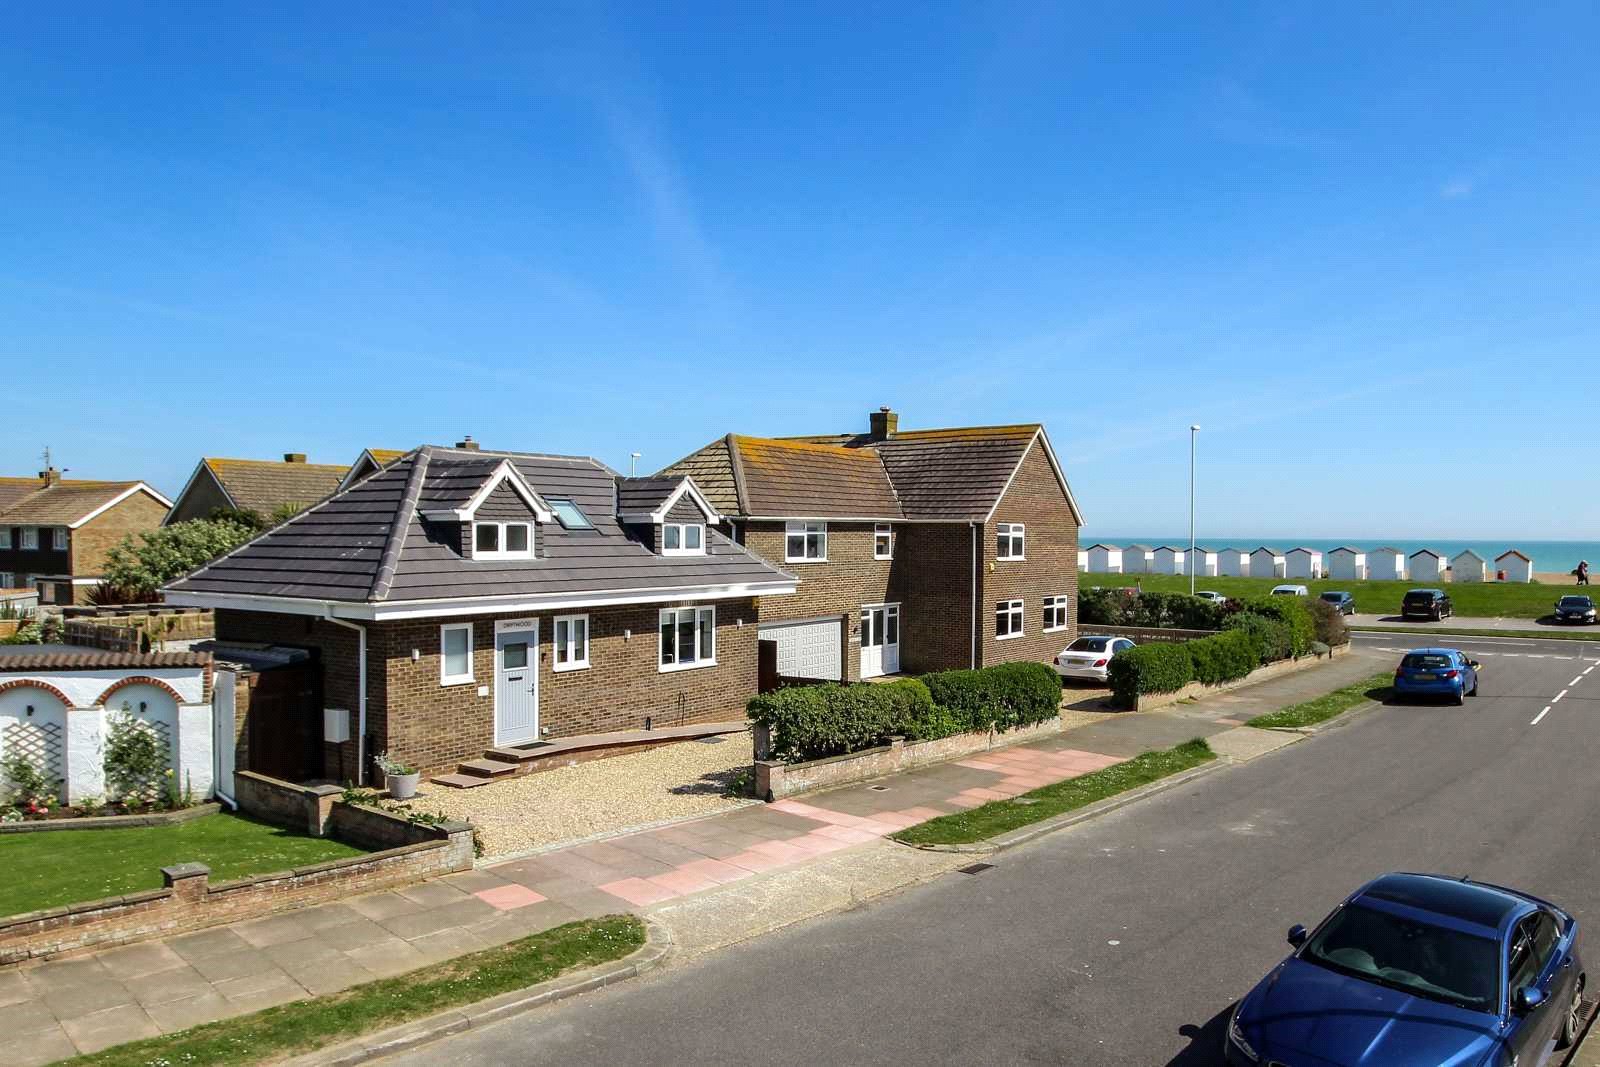 Alinora Crescent, Goring-by-Sea - A Success Story (Ref: ANG210050)